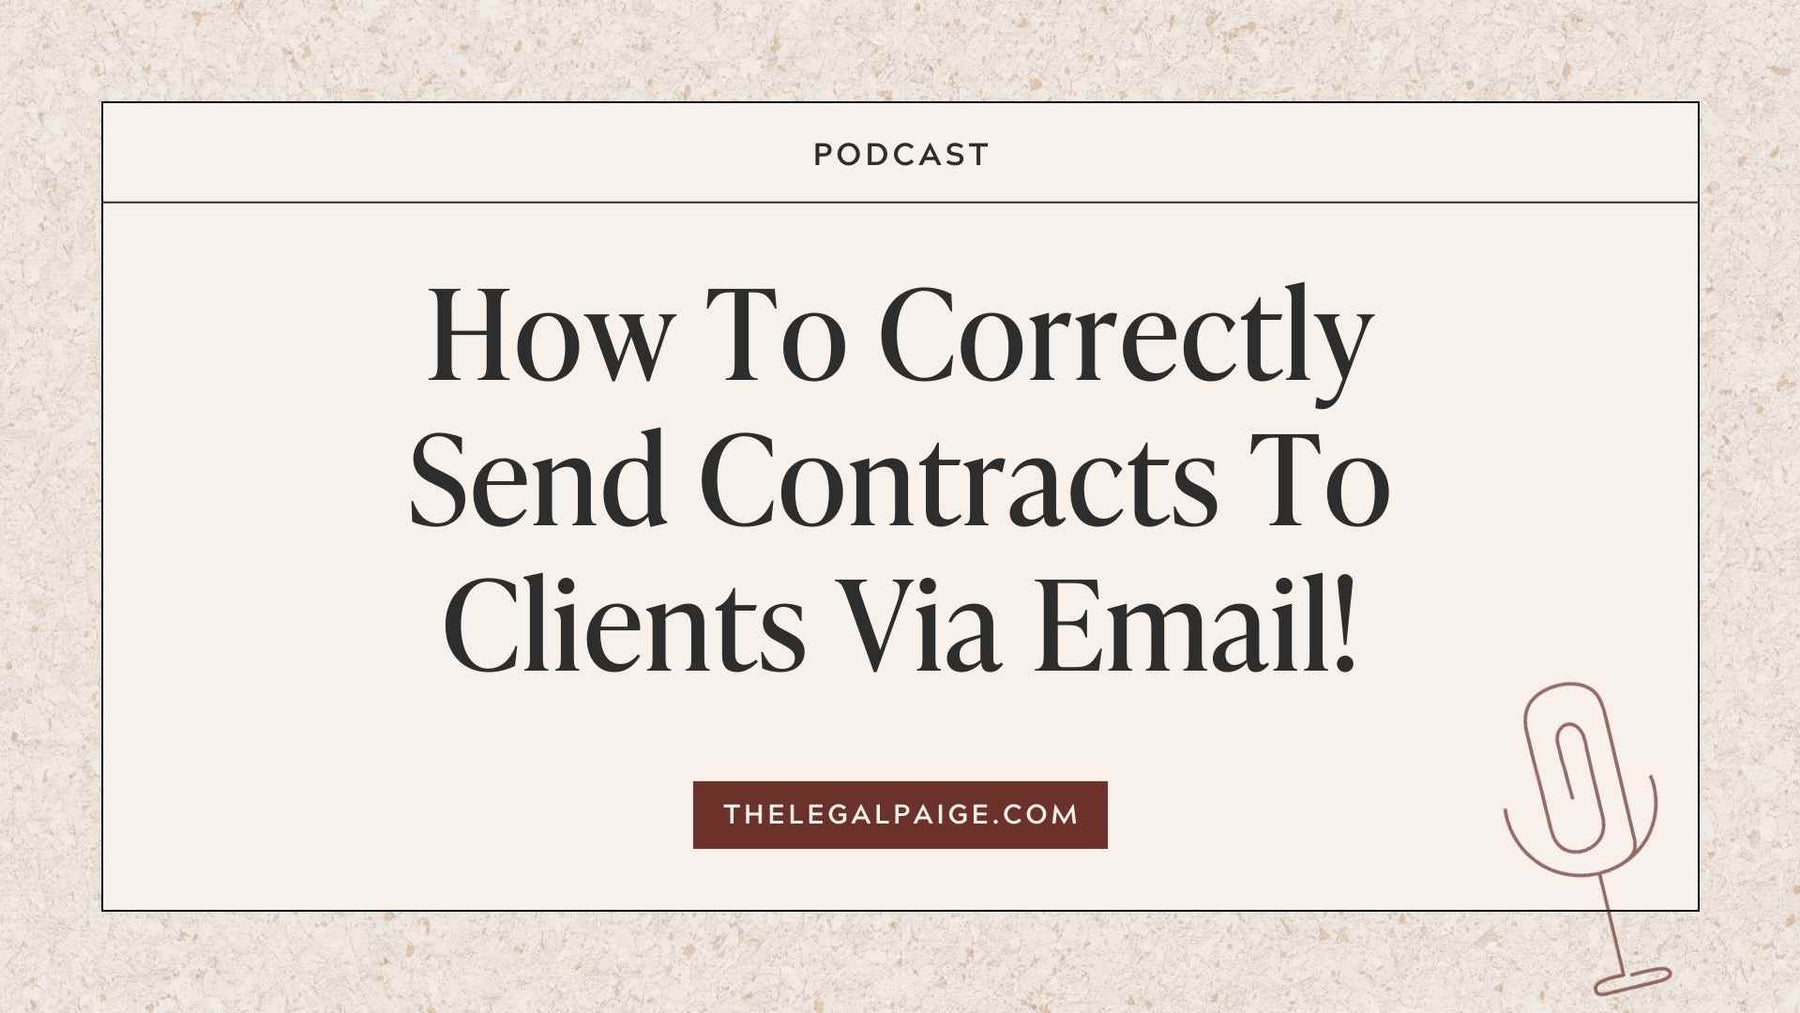 Episode 110: How To Correctly Send Contracts To Clients VIA Email!